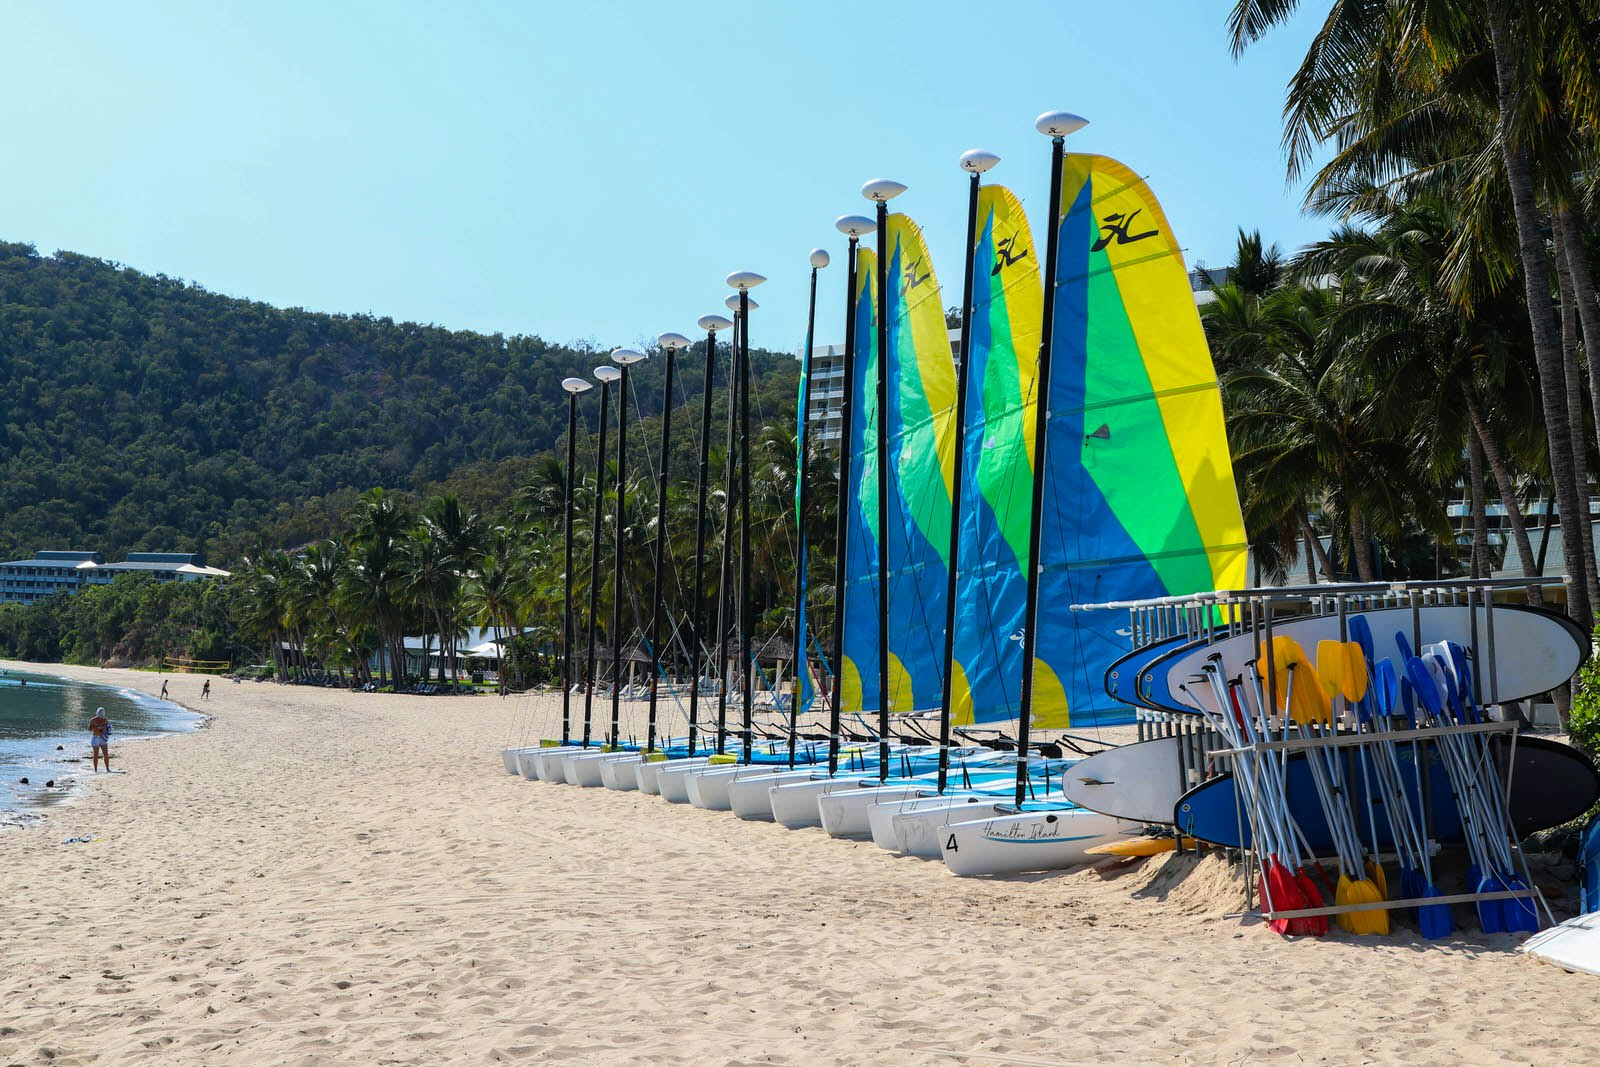 Several small boats with colourful sails are lined up on a white sand beach next to a rack of stand up paddle boards on a sunny day